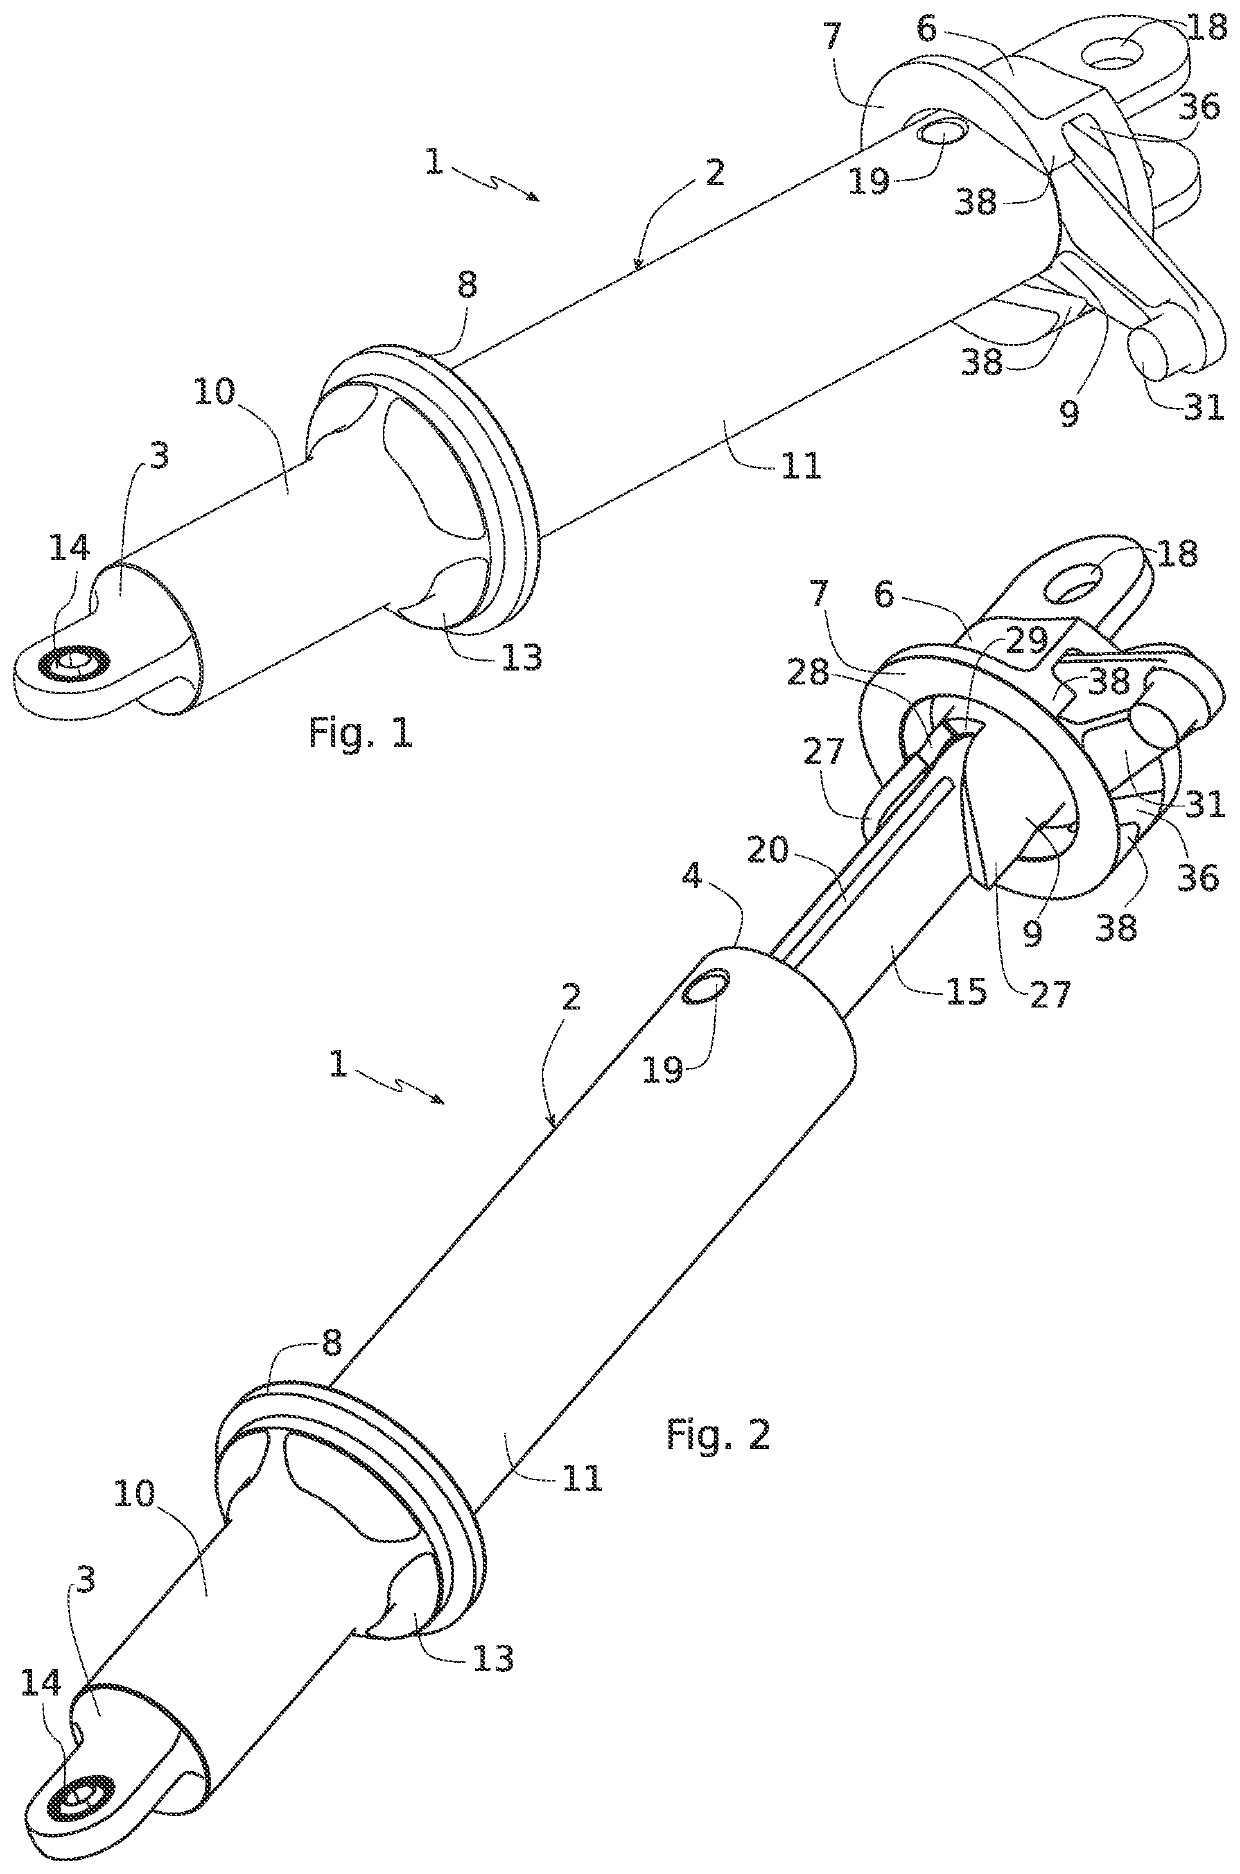 Emergency opening device for an aircraft door, comprising a telescopic operating member